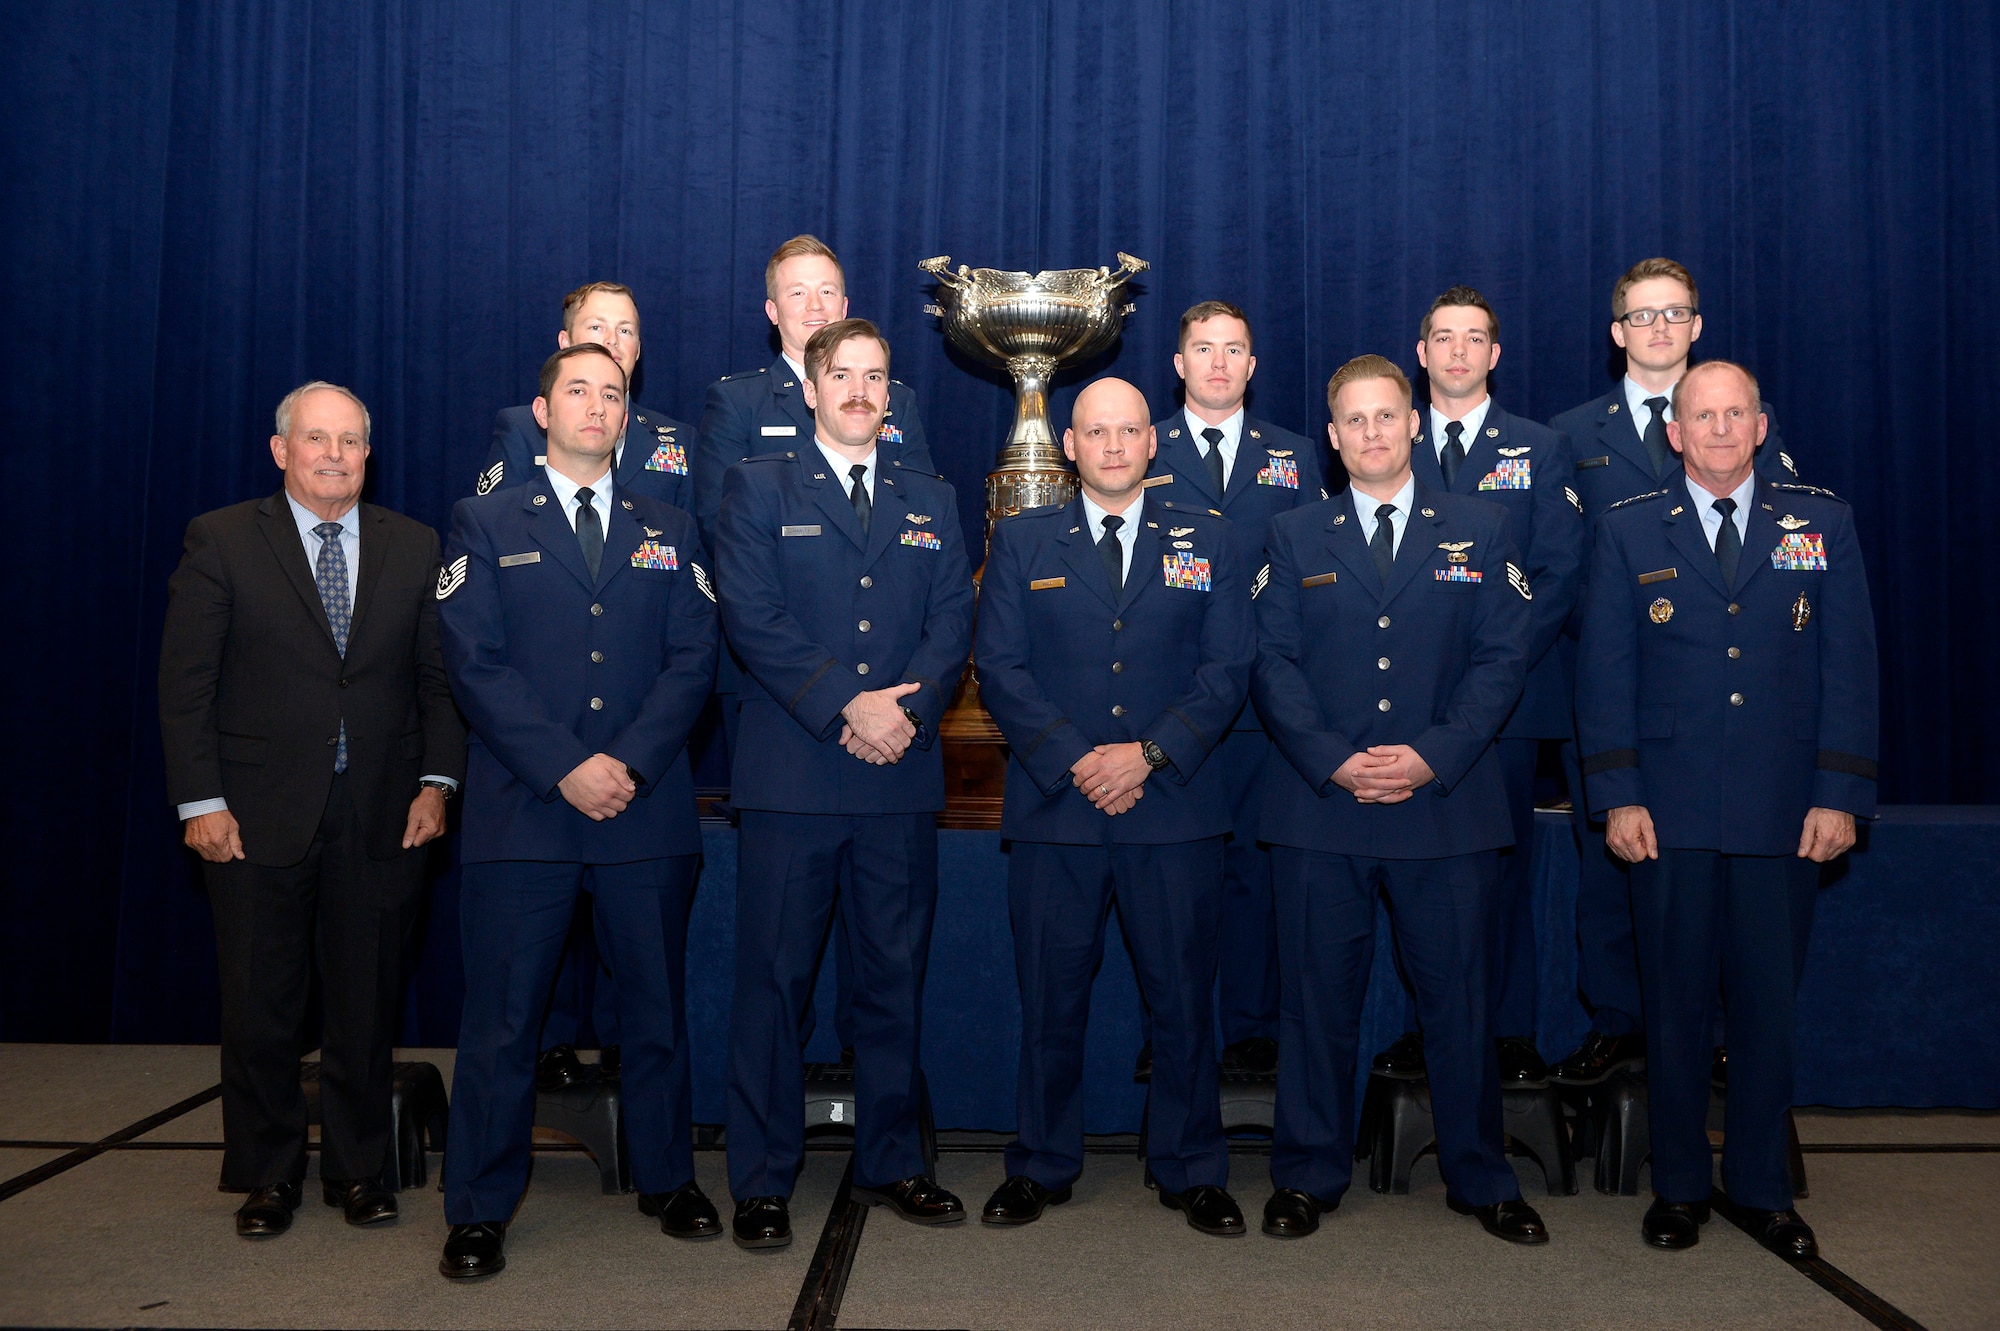 Members of the AC-130U Gunship aircrew known as "Spooky 43" Air Force Vice Chief of Staff Gen. Stephen W. Wilson and Lt. Gen. (Ret.) Stephen Wood pose for a photo in front of the MacKay trophy Nov. 29, 2017, in Arlington, Va.  The aircrew received the trophy during an awards dinner. First awarded in 1912, the Mackay Trophy honors the most meritorious U.S. Air Force flight of the previous year. (U.S. Air Force photo by Staff Sgt. Rusty Frank)